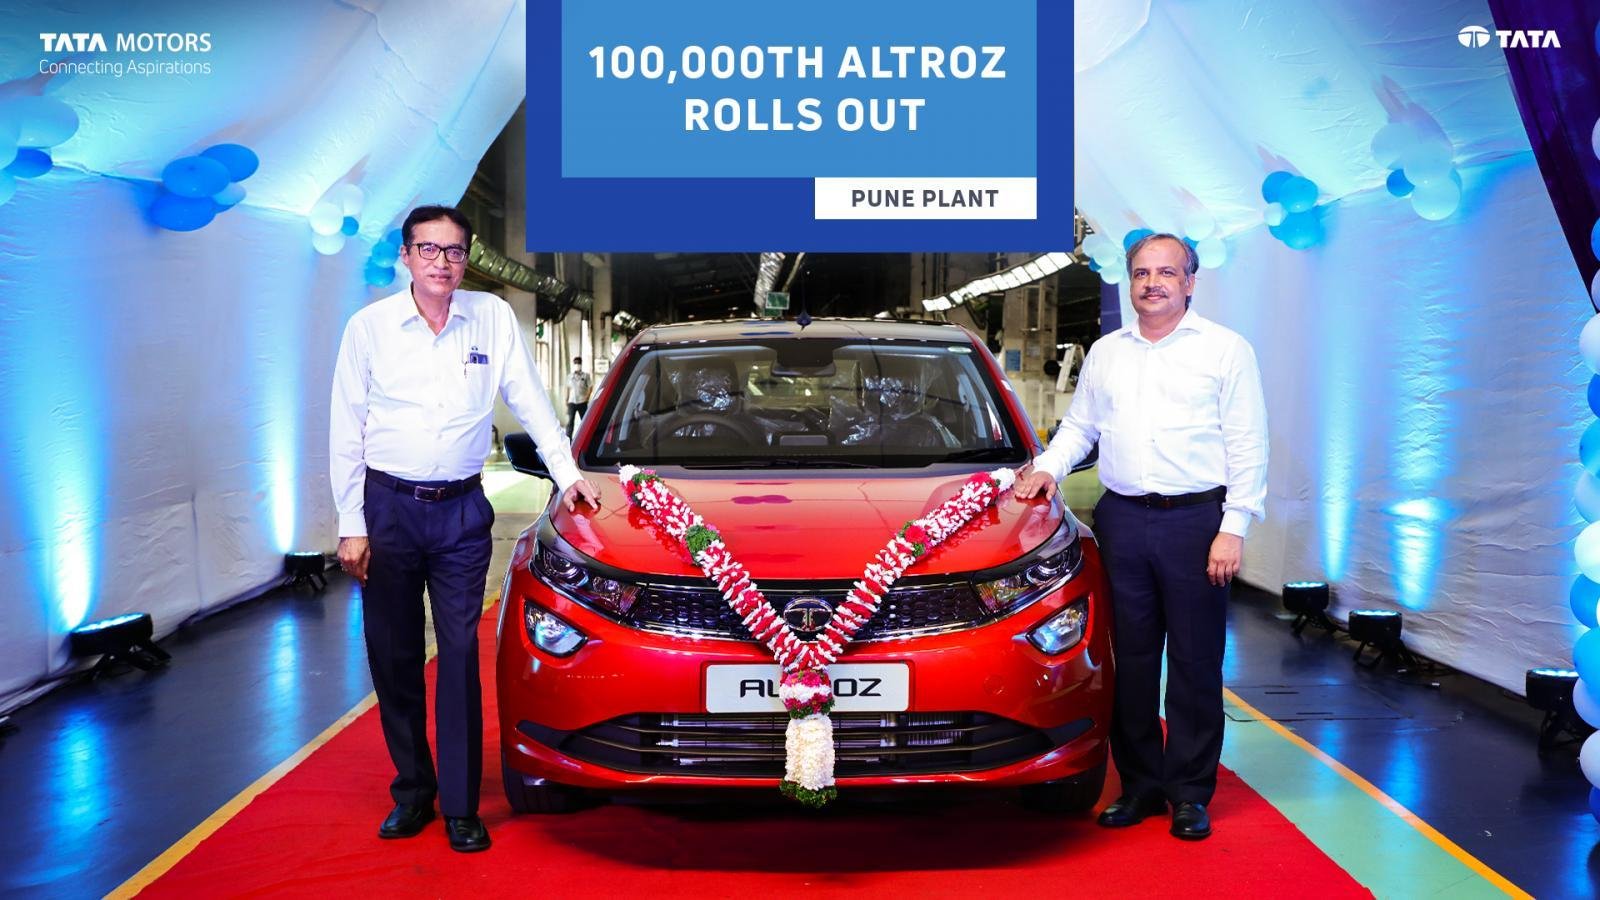 Tata Motors Rolls Out 100,000th Altroz from its Pune Plant